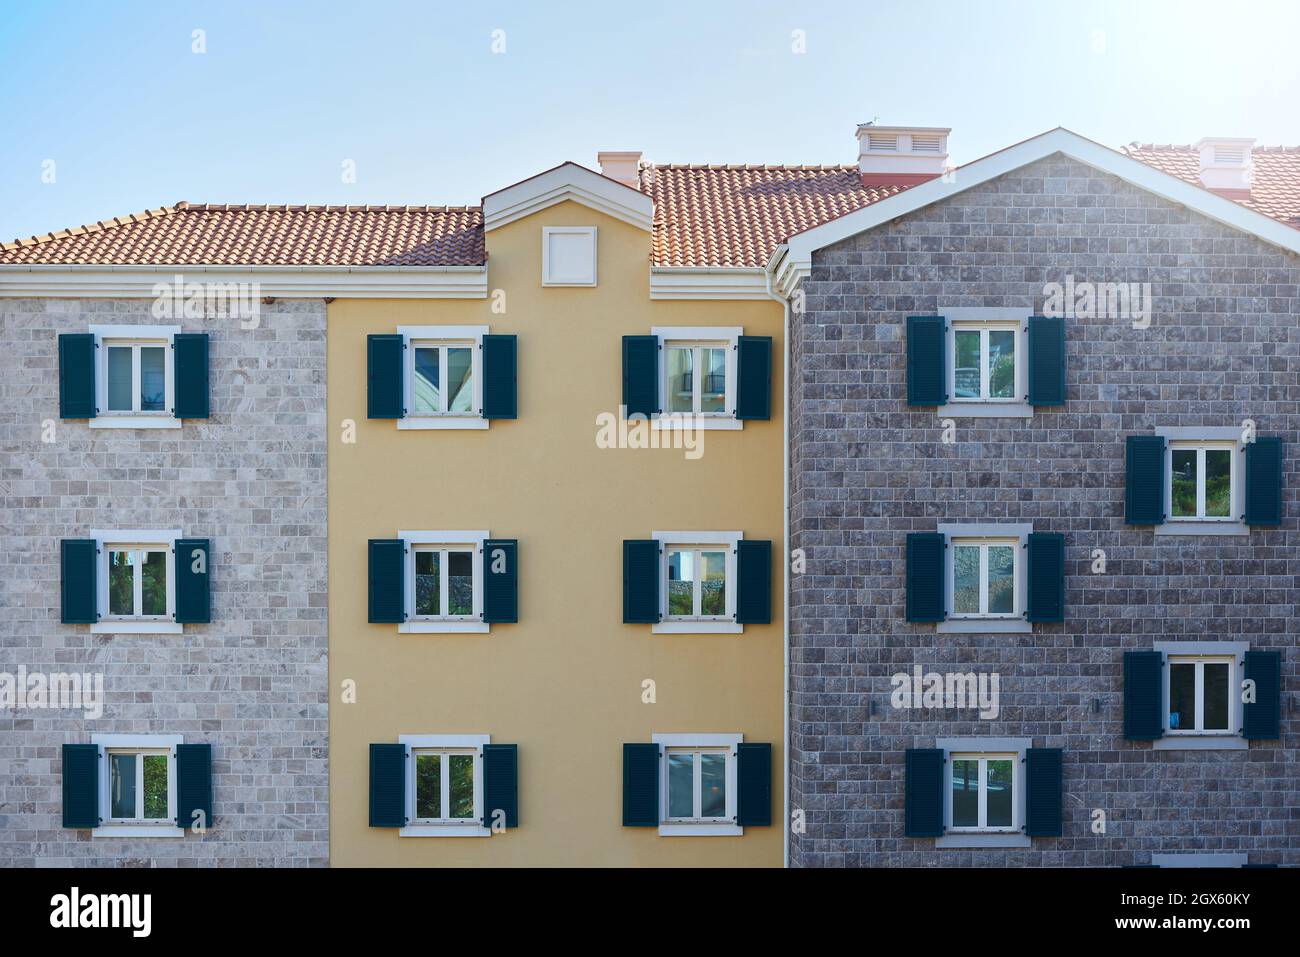 Facade of a new residential building with wall different finishing materials in Europe Stock Photo